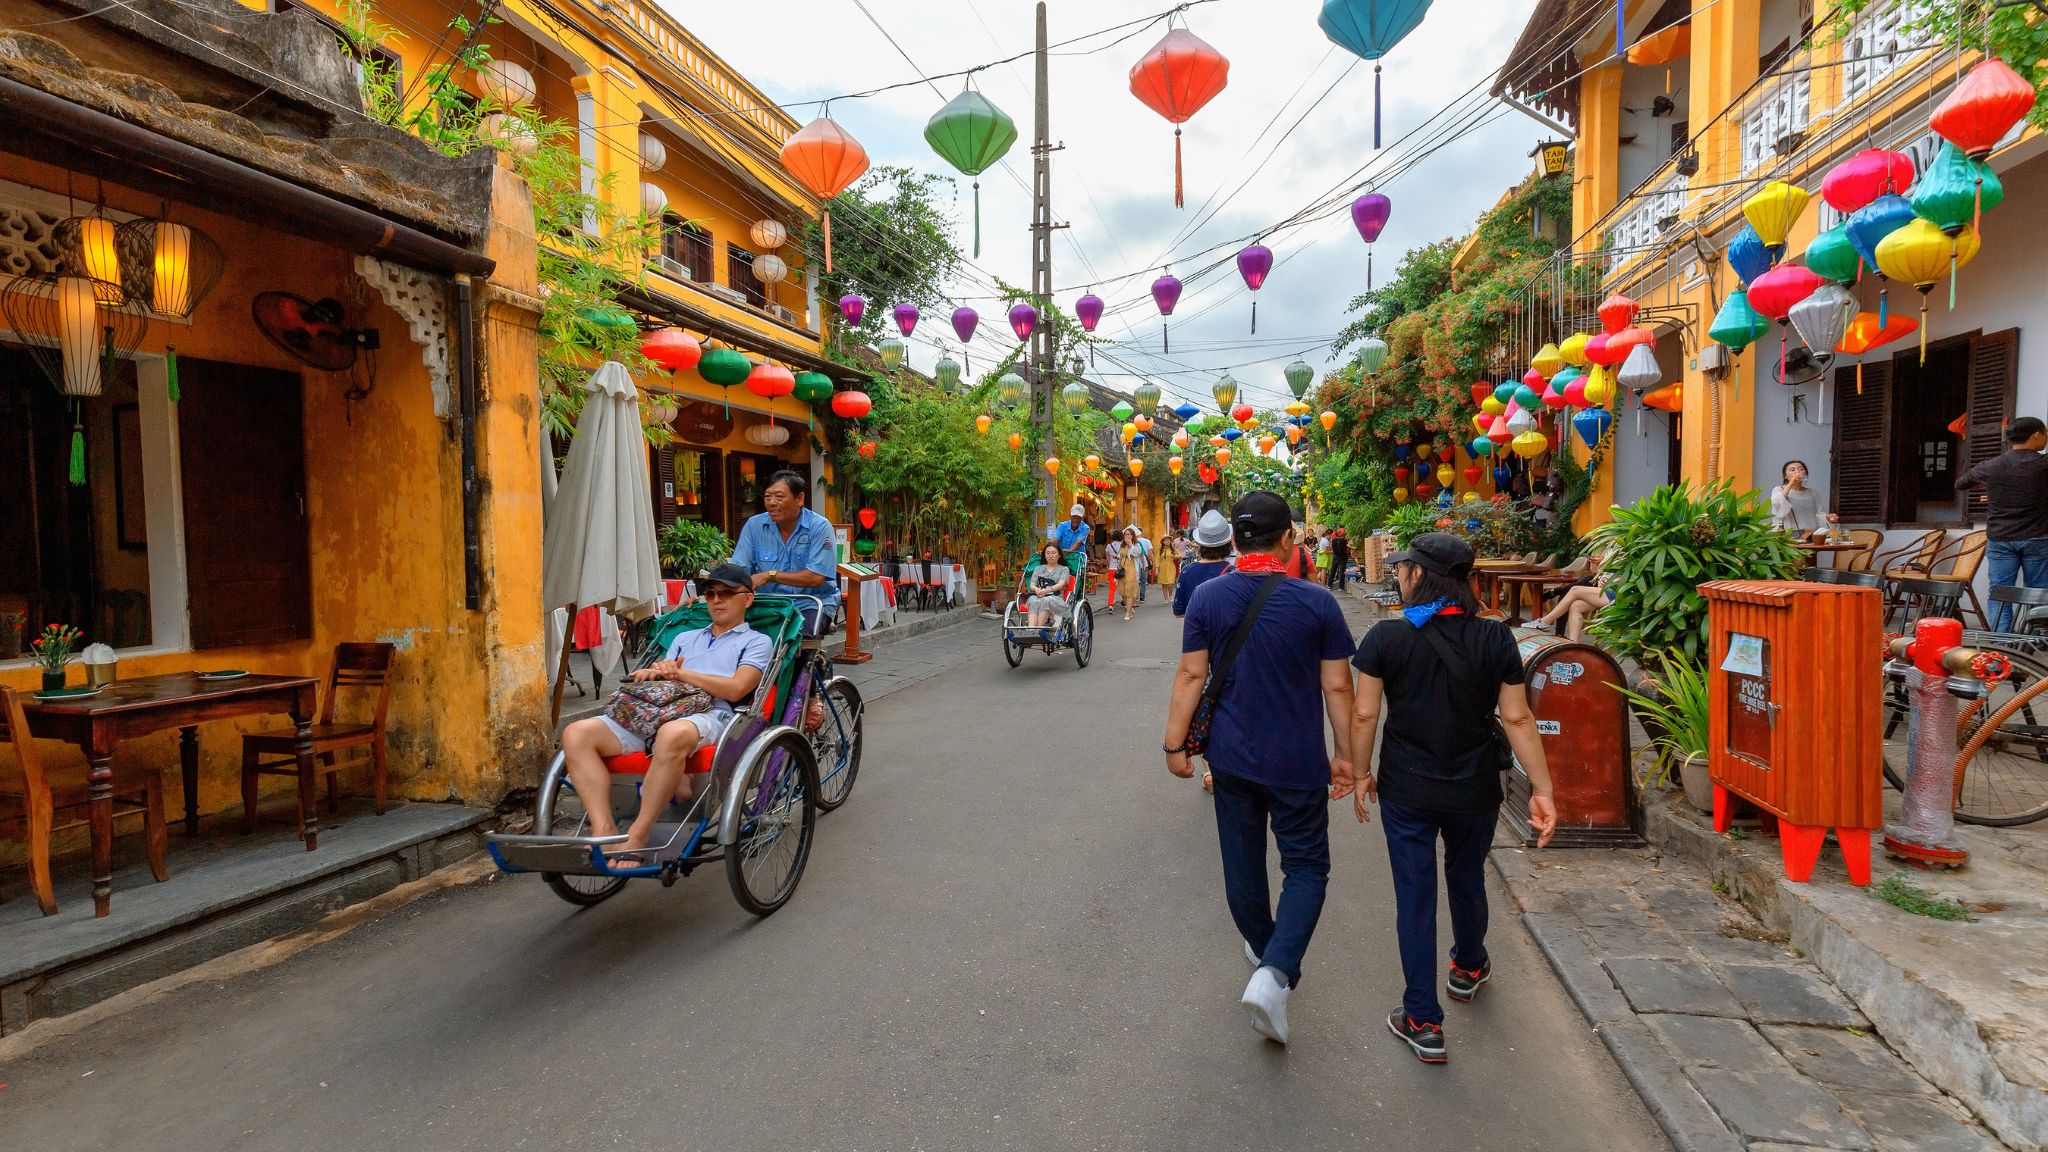 Day 4 Immersed In The Vintage Beauty Of Hoi An Ancient Town